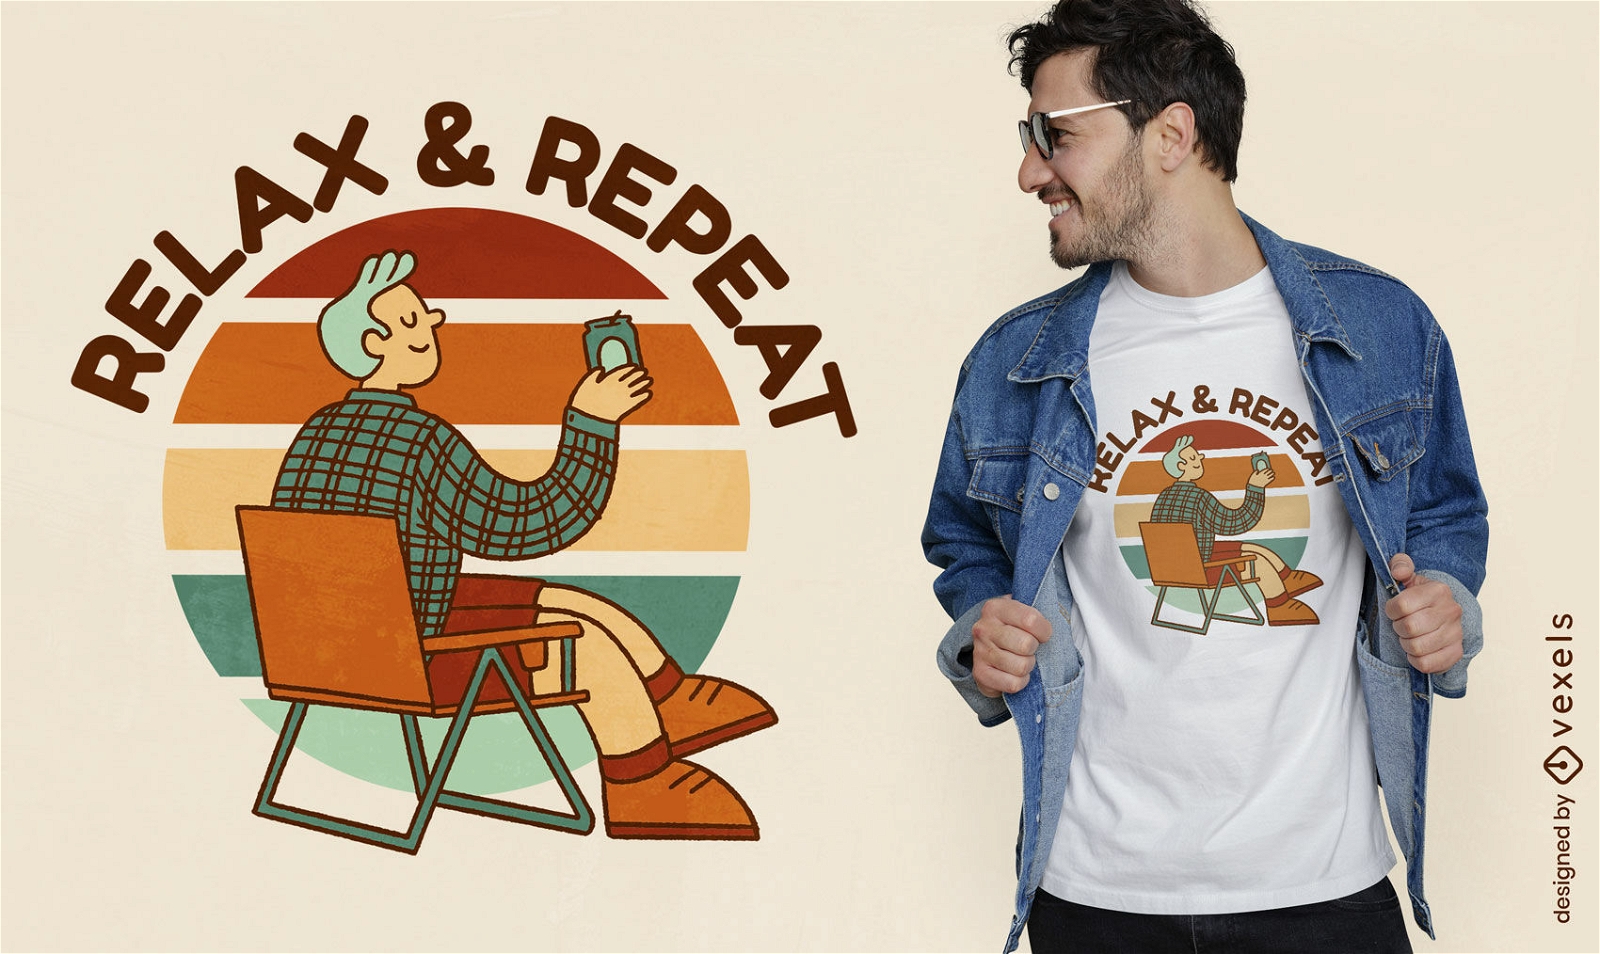 Retro-Entspannungs-Camping-T-Shirt-Design